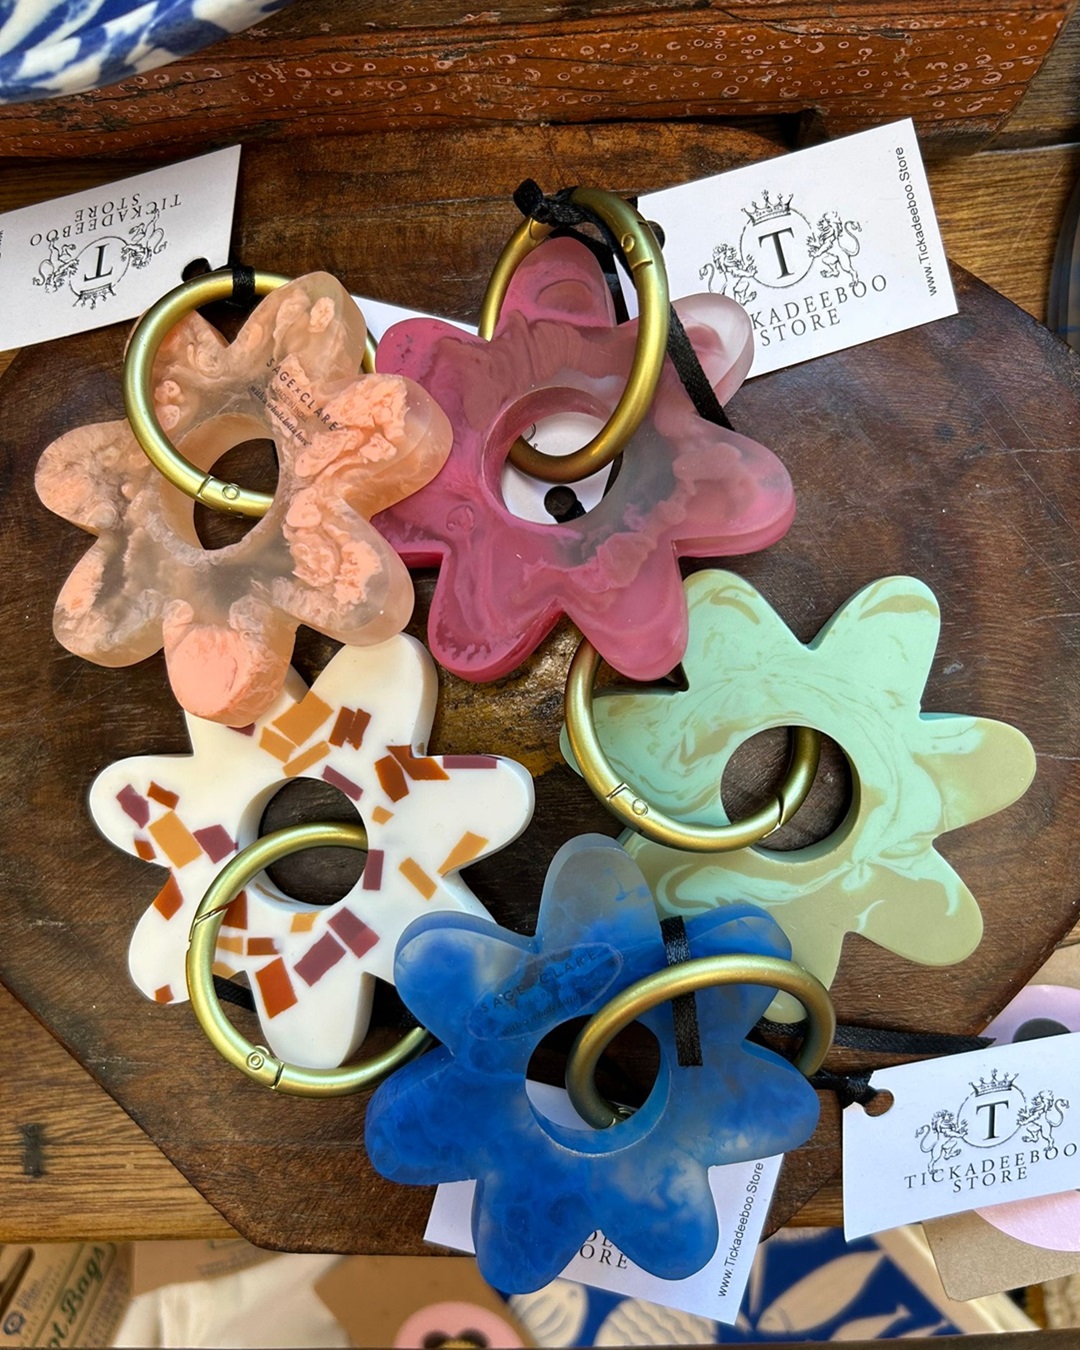 Flower colourful keyrings on wooden table